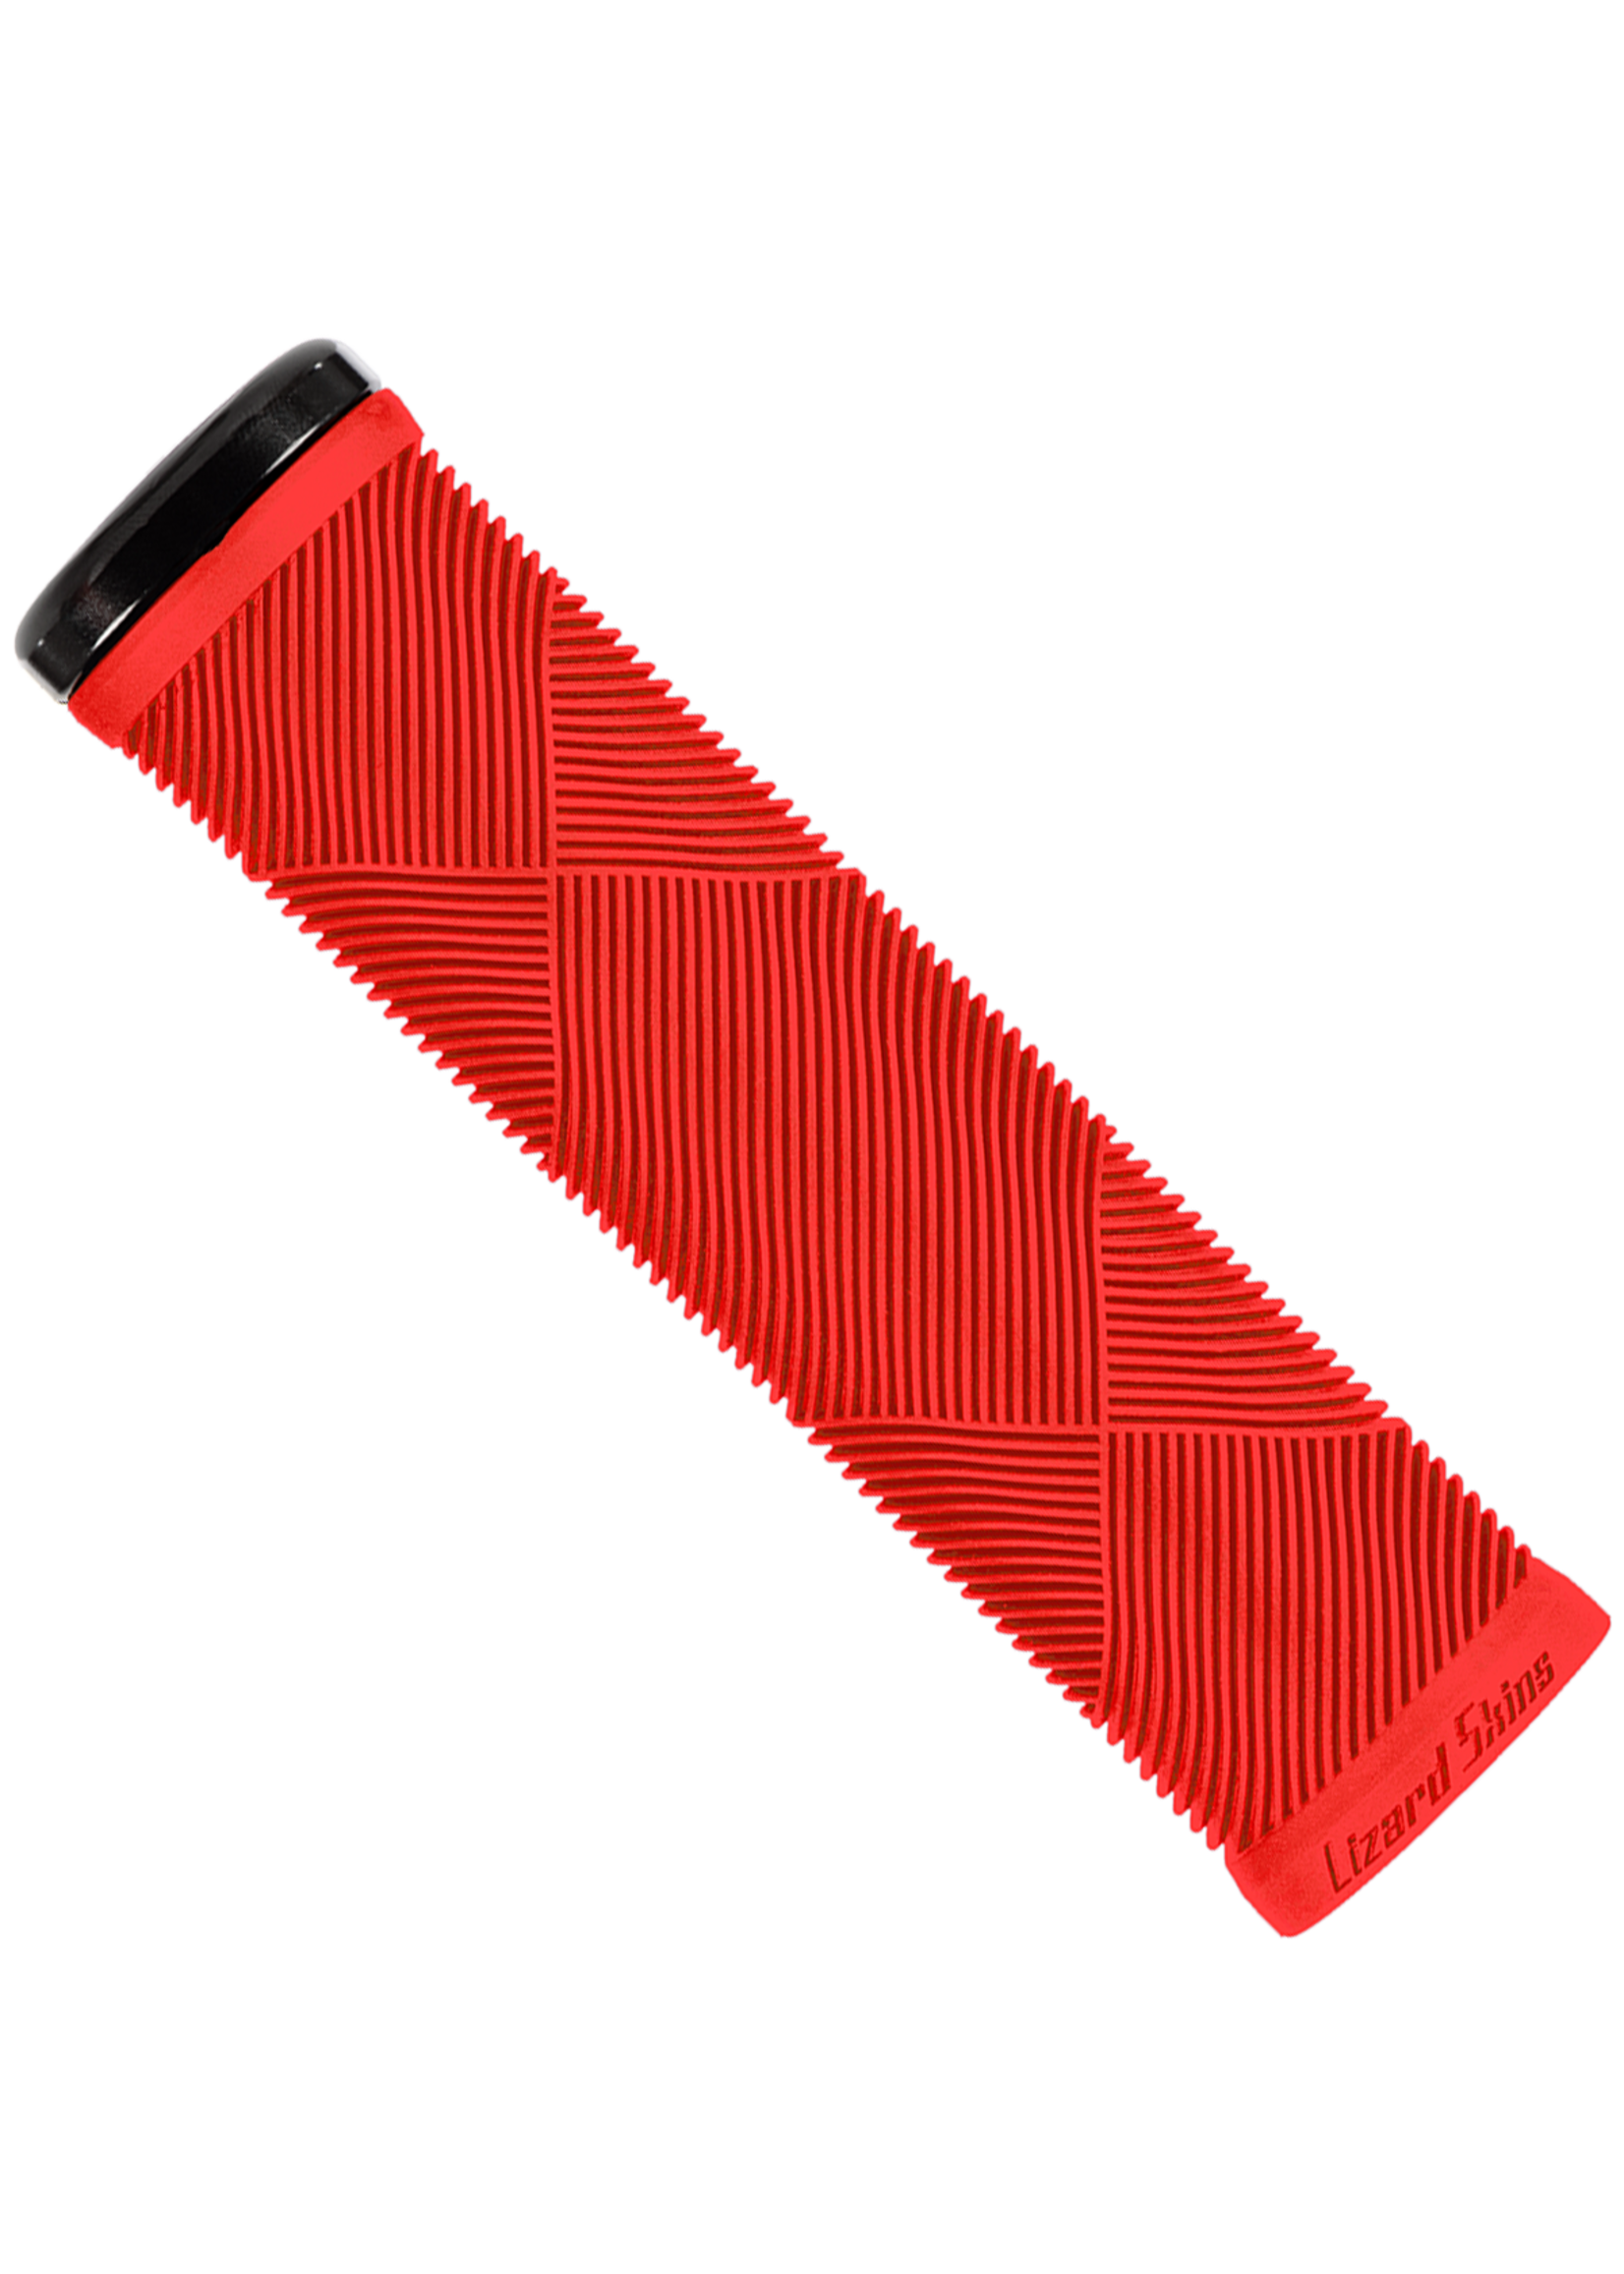 LIZARD SKINS Lizard Skins, Strata Single-Sided Lock-On, Grips, 135mm, Candy Red, Pair